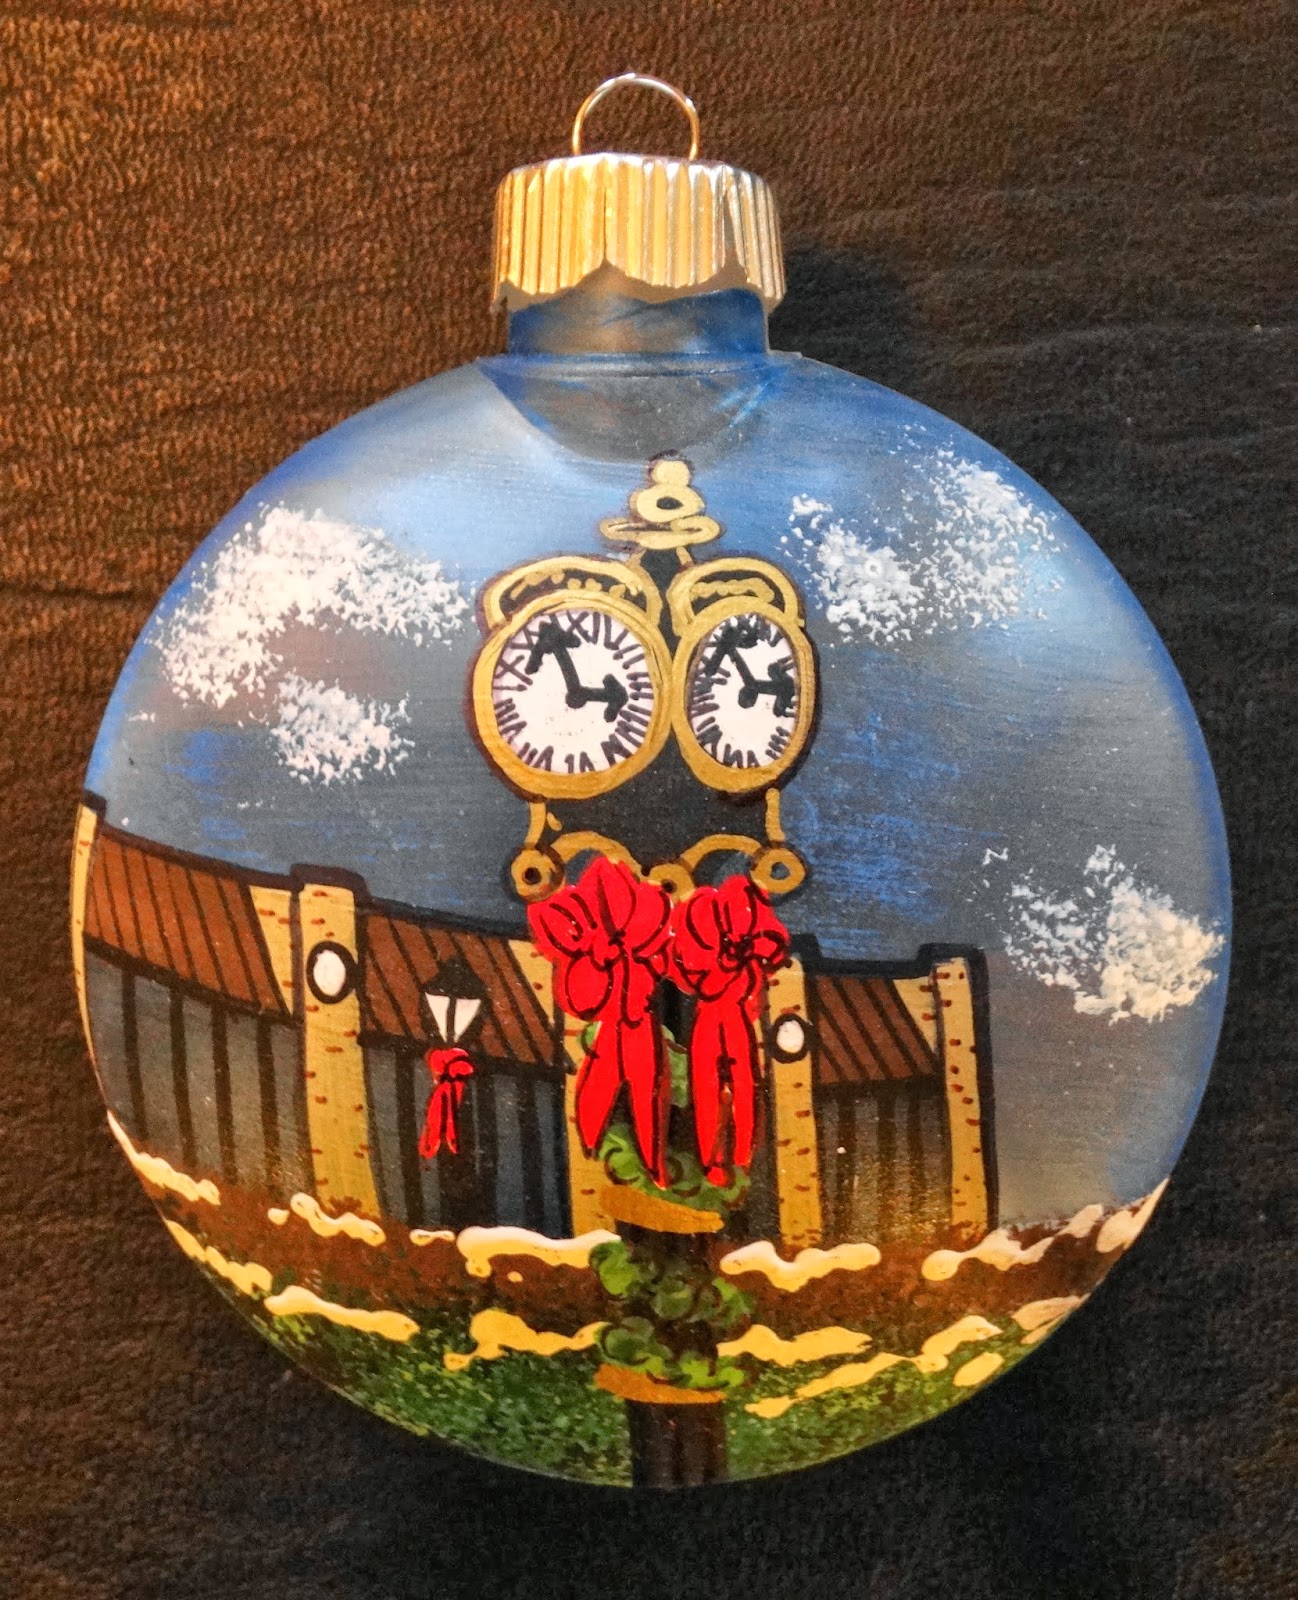 Unique Christmas Ornaments For Sale to Support College Fund | Genma Speaks